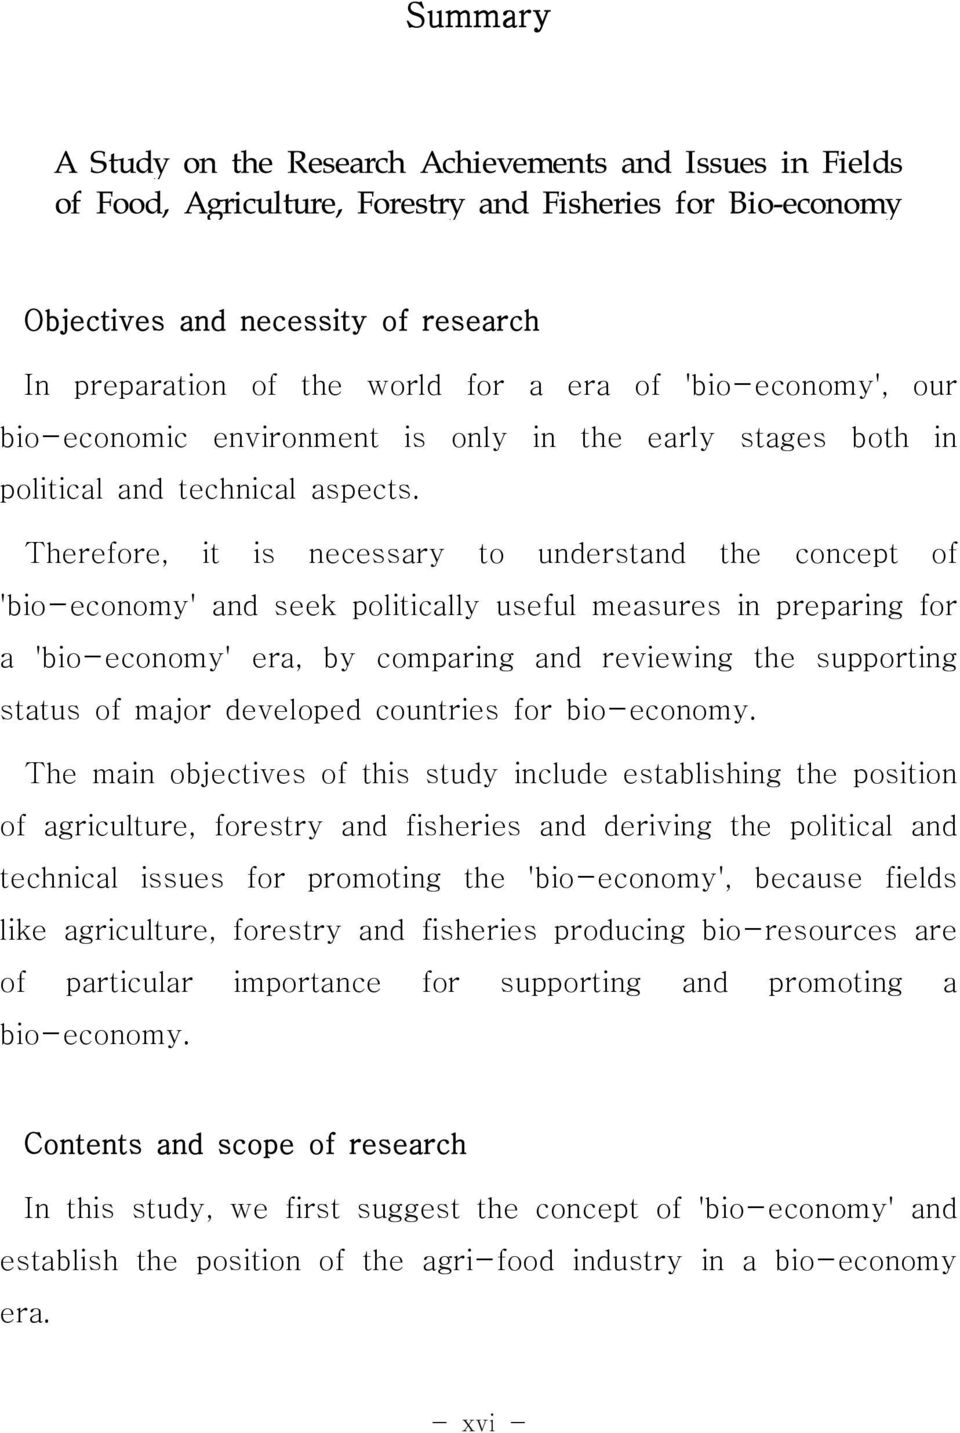 Therefore, it is necessary to understand the concept of 'bio-economy' and seek politically useful measures in preparing for a 'bio-economy' era, by comparing and reviewing the supporting status of